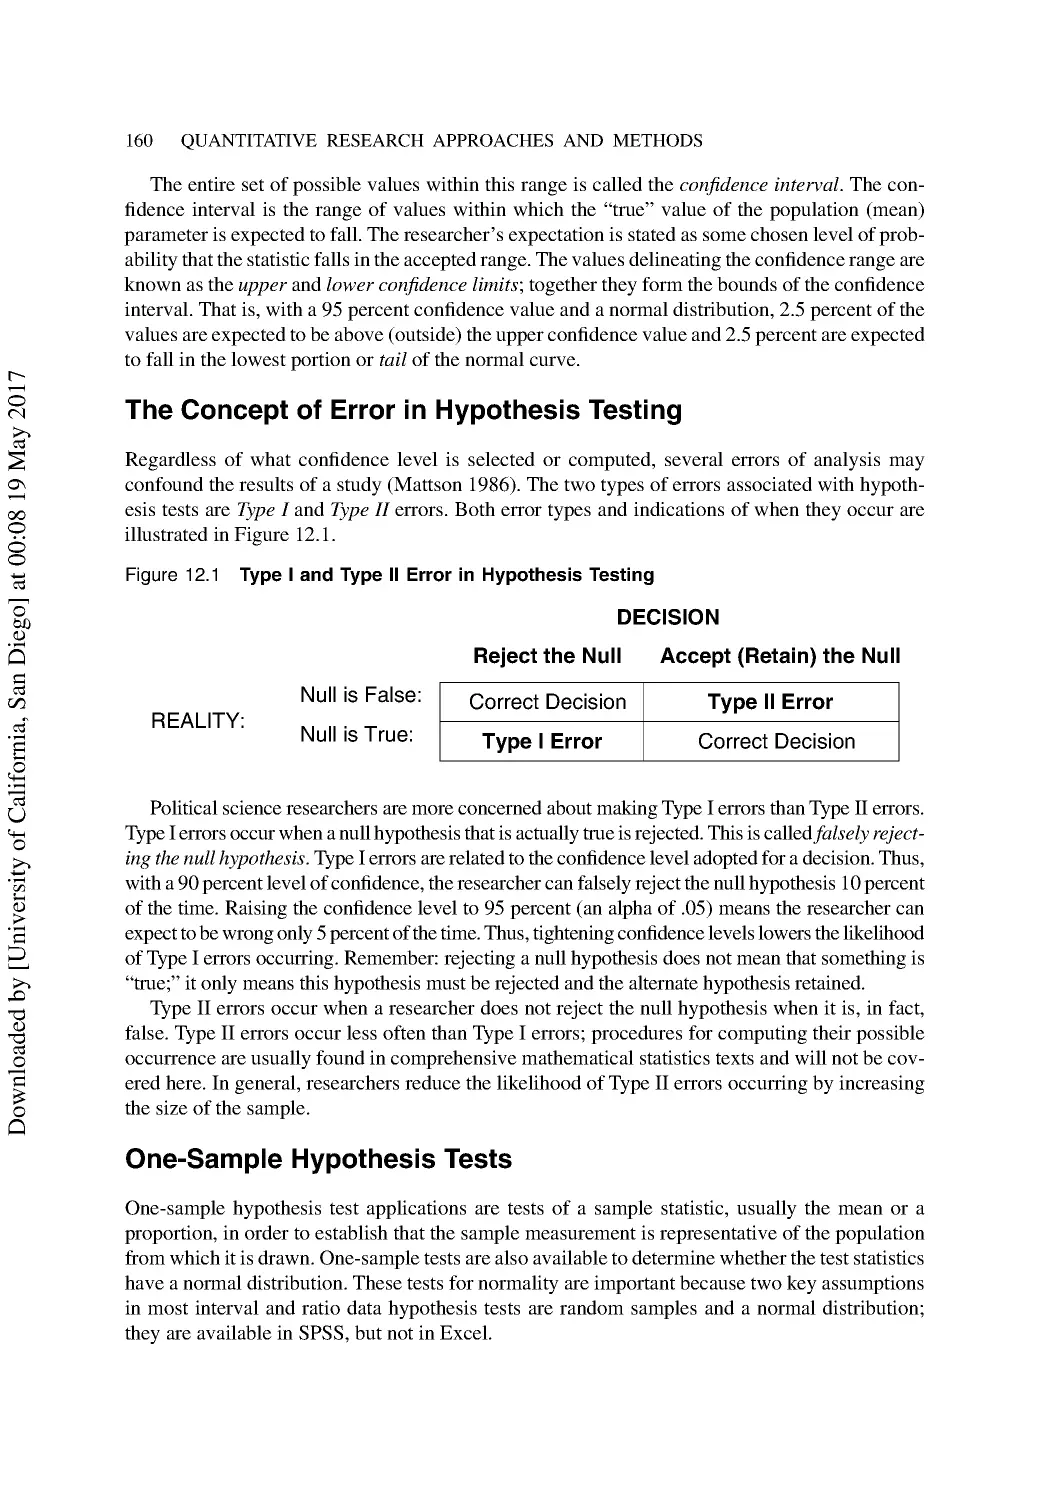 The Concept of Error in Hypothesis Testing
One-Sample Hypothesis Tests